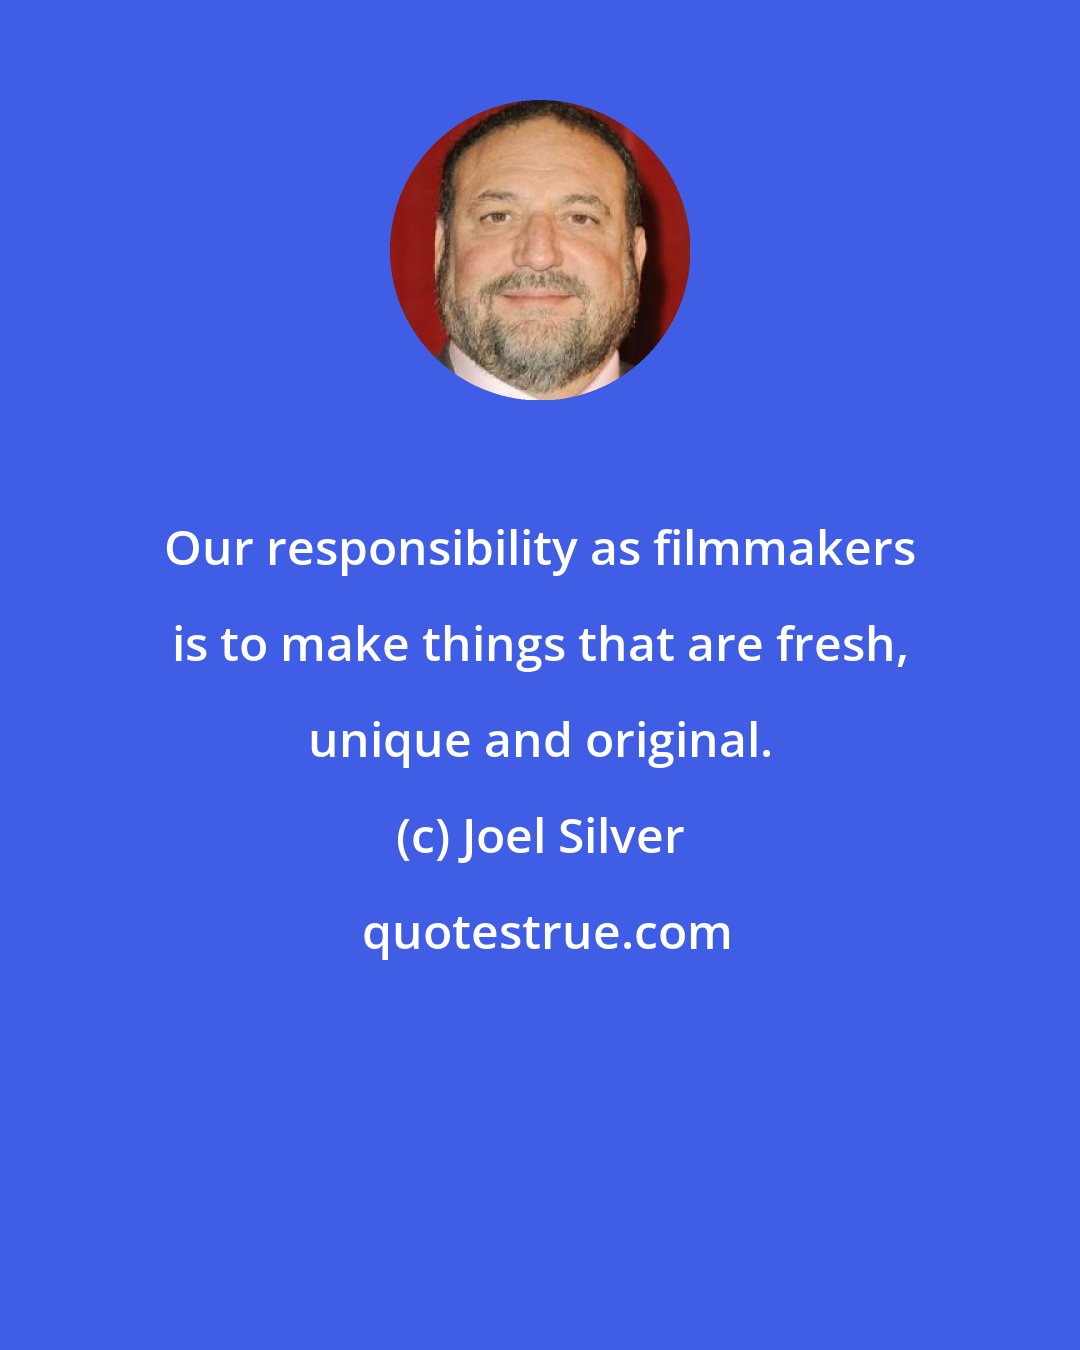 Joel Silver: Our responsibility as filmmakers is to make things that are fresh, unique and original.